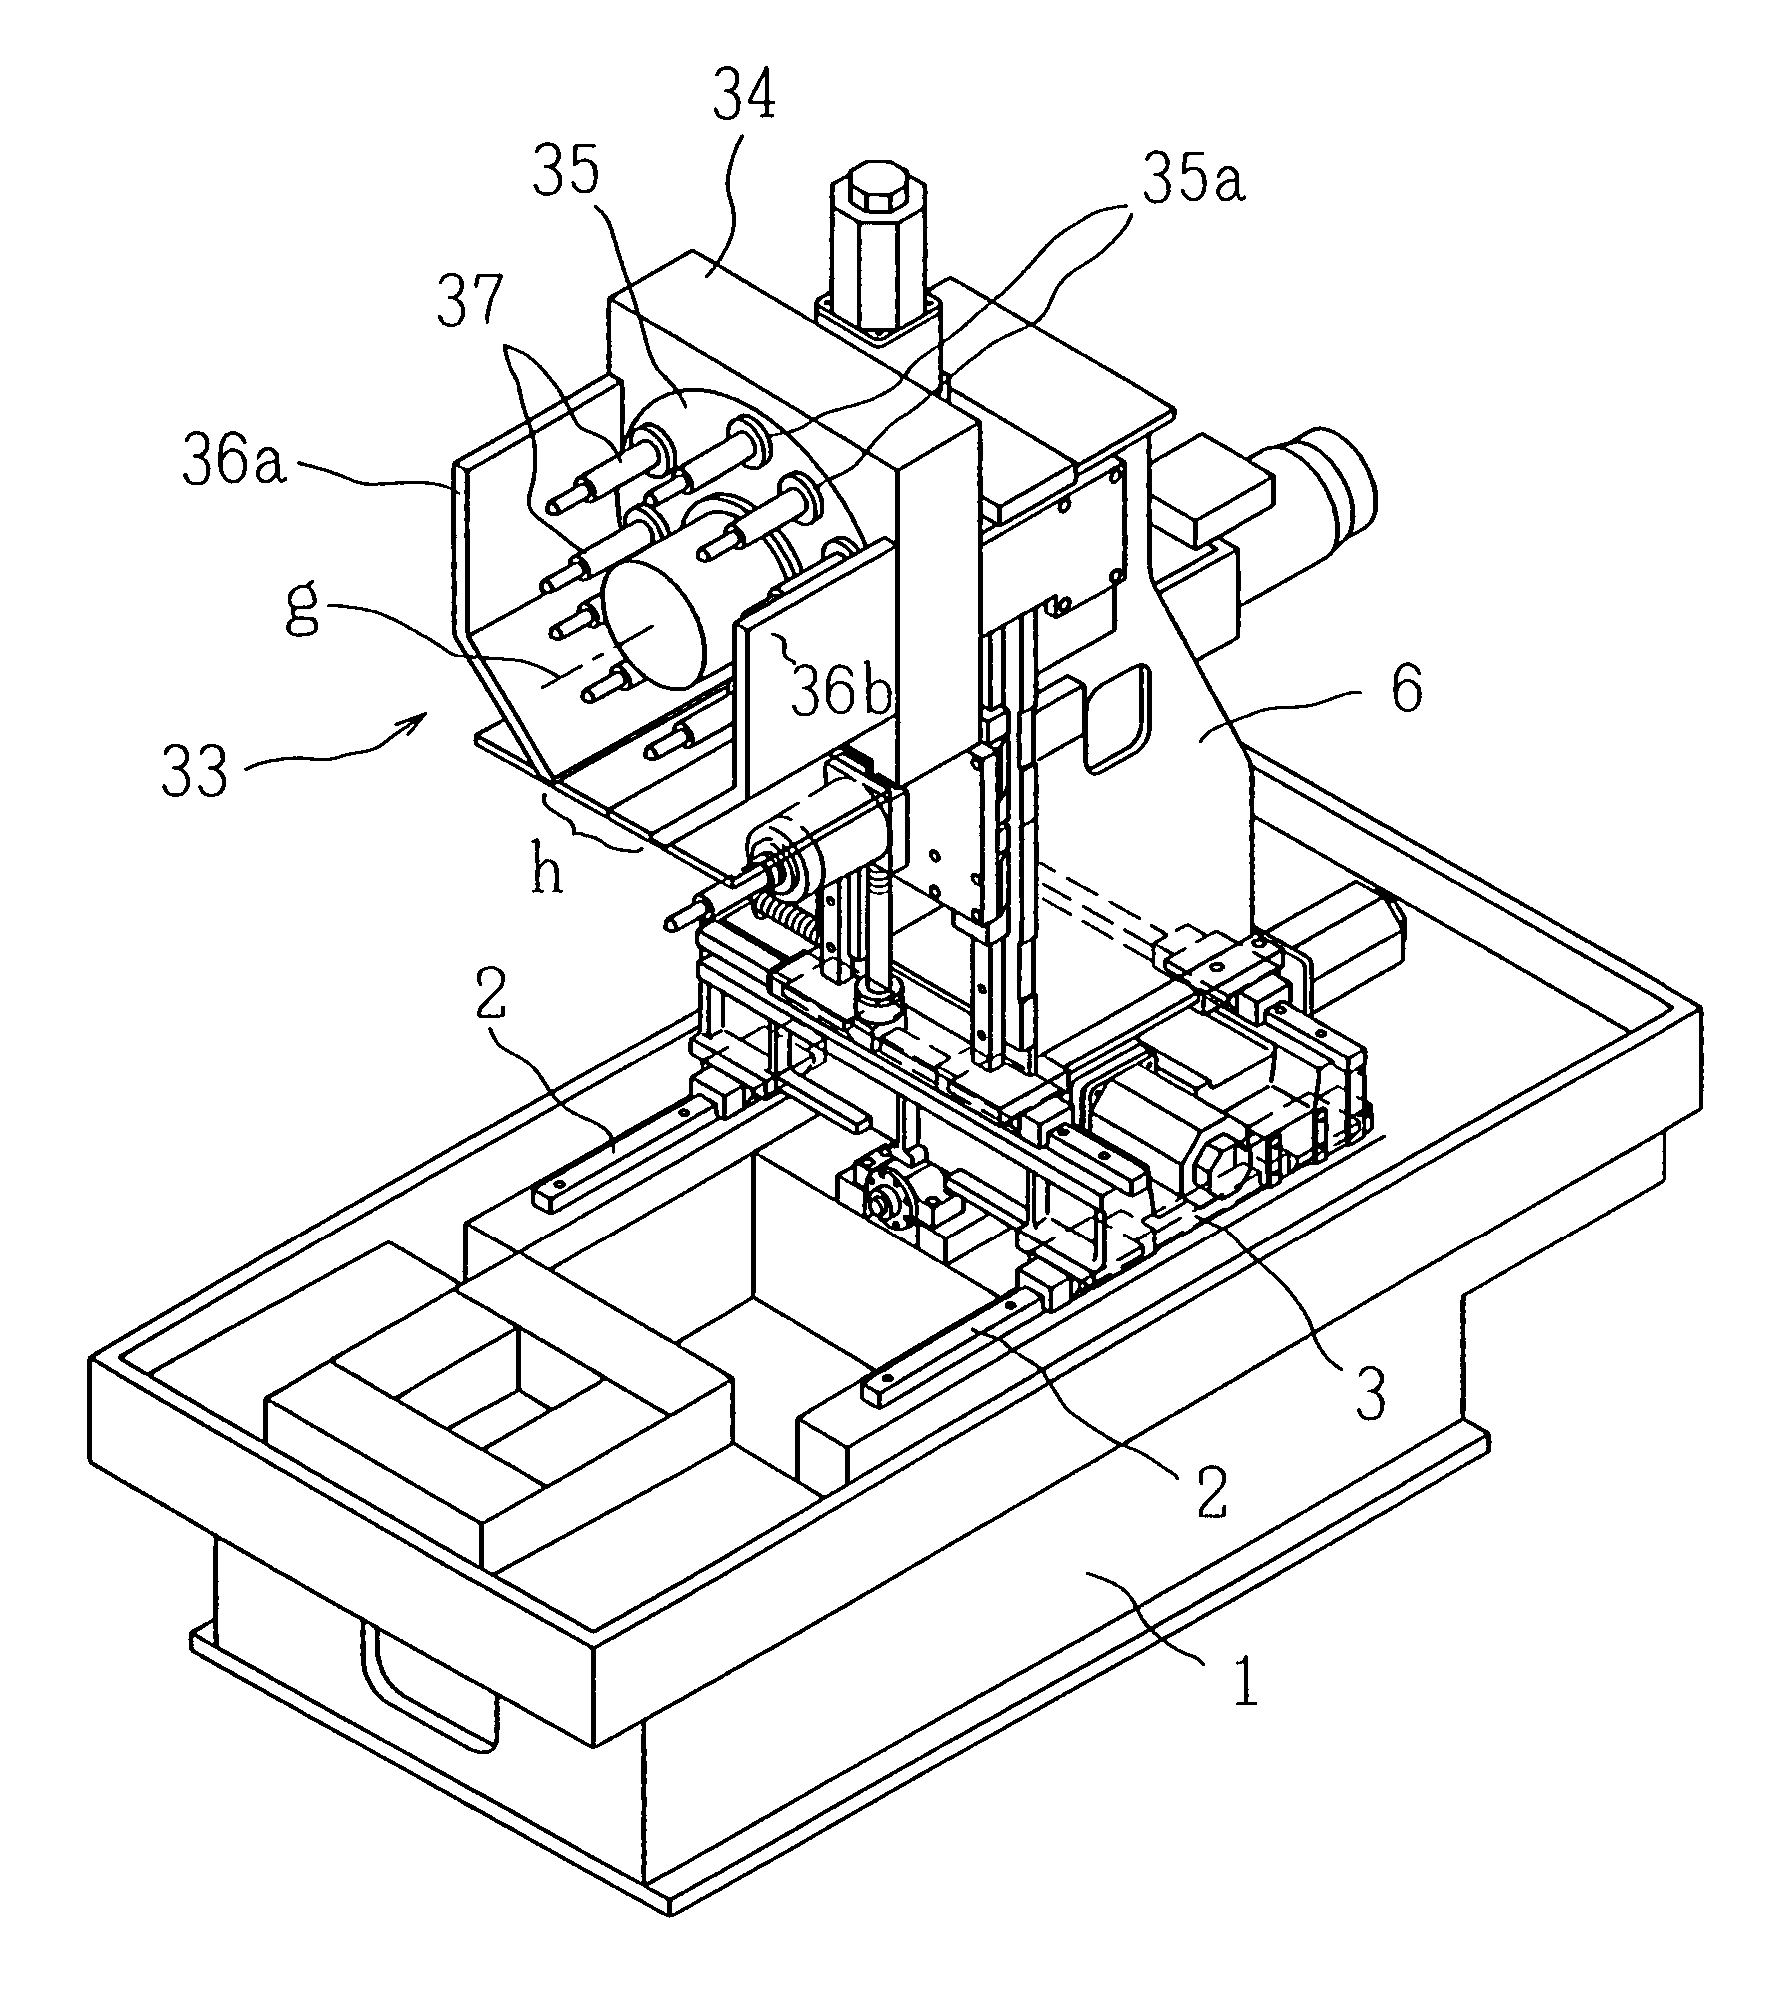 Column moving type machine tool with shield machining space